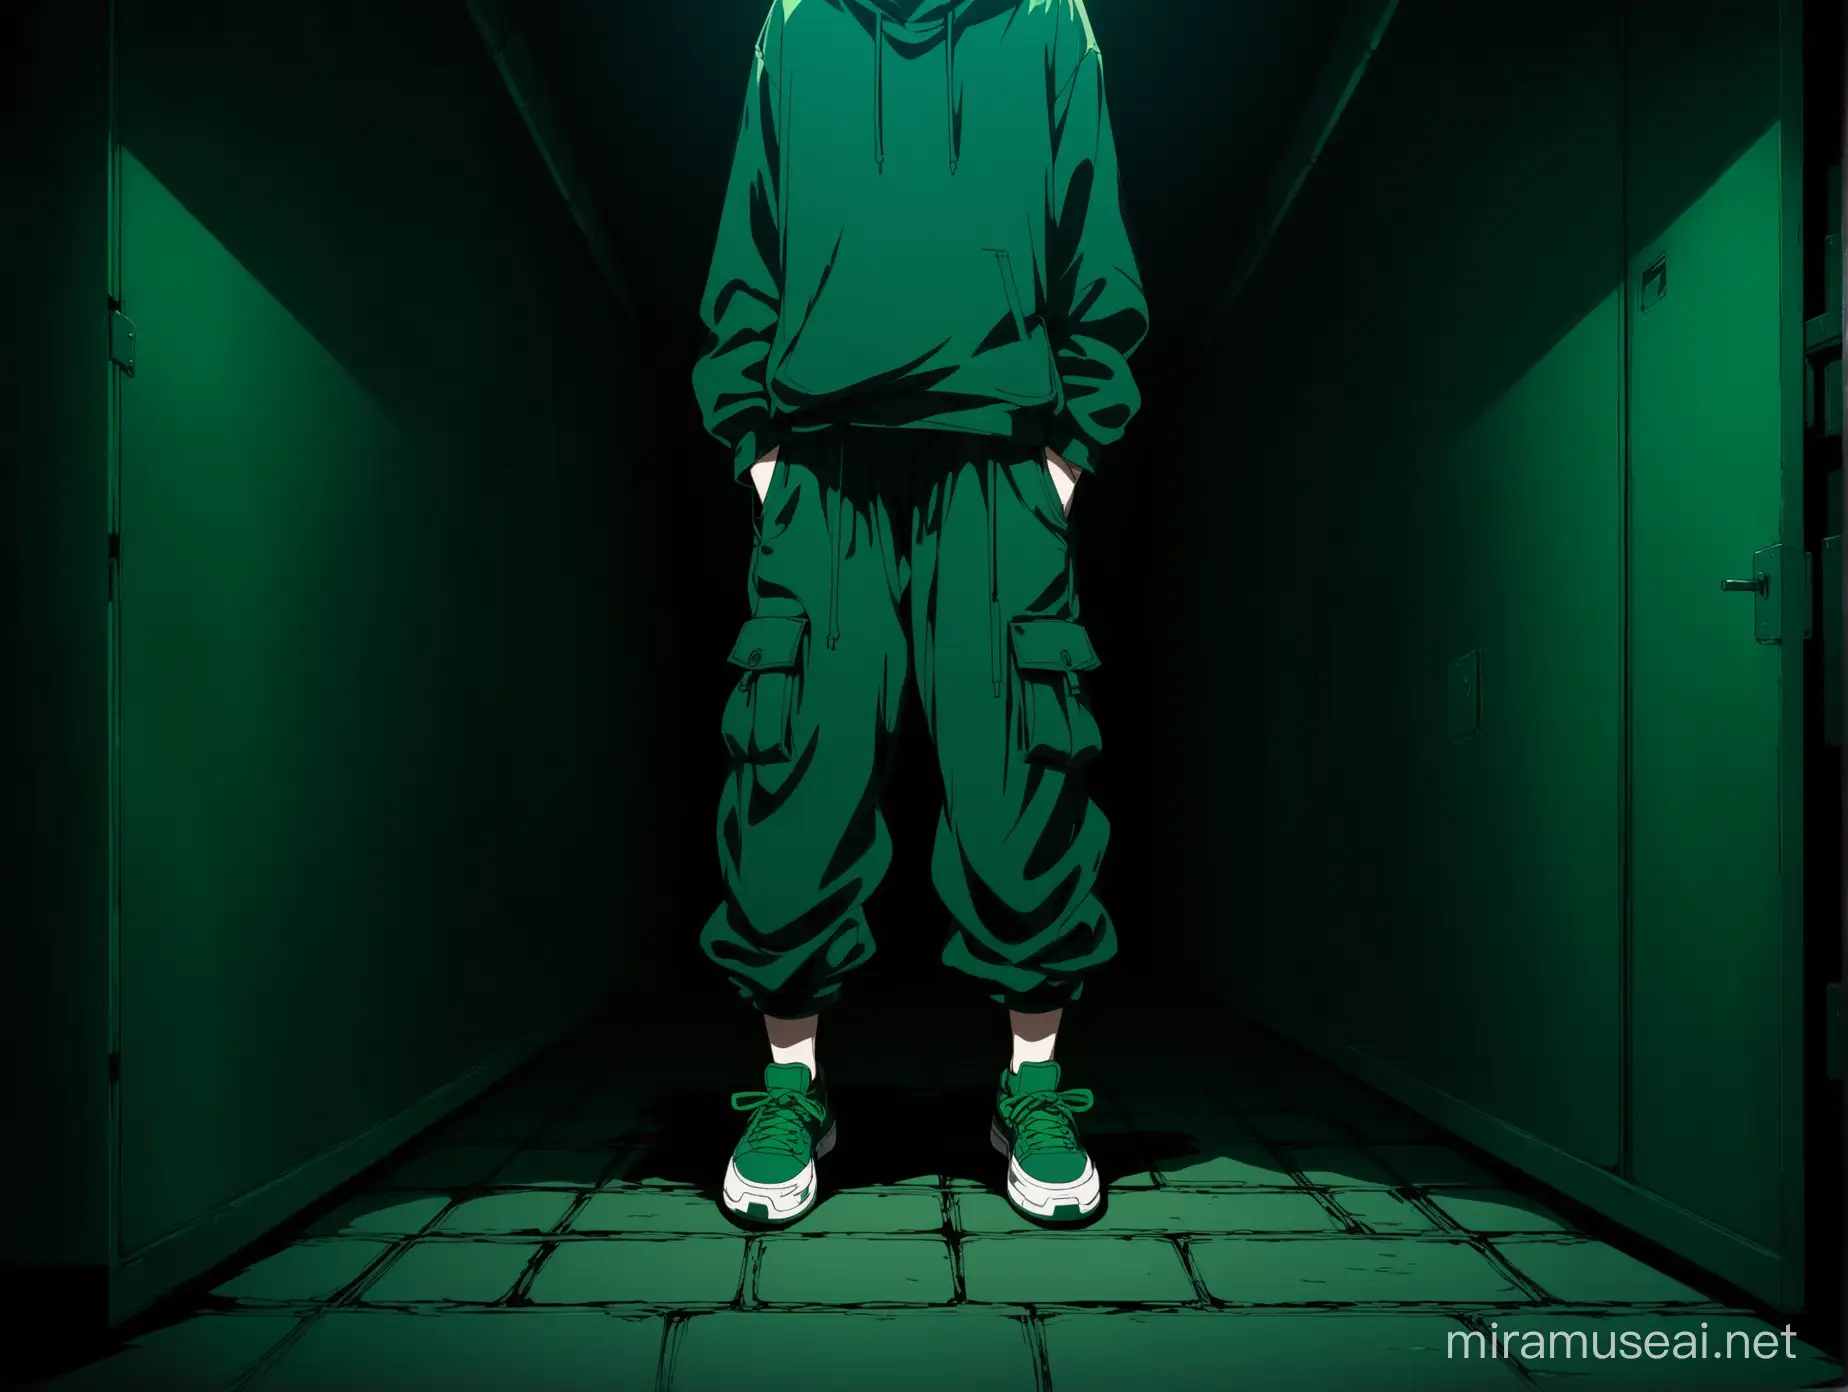 A dark front image of an anime character's legs wearing black baggy pants and dark green sneakers in a dark, broad, underground secret room with dark green contrasts and vibe in anime style